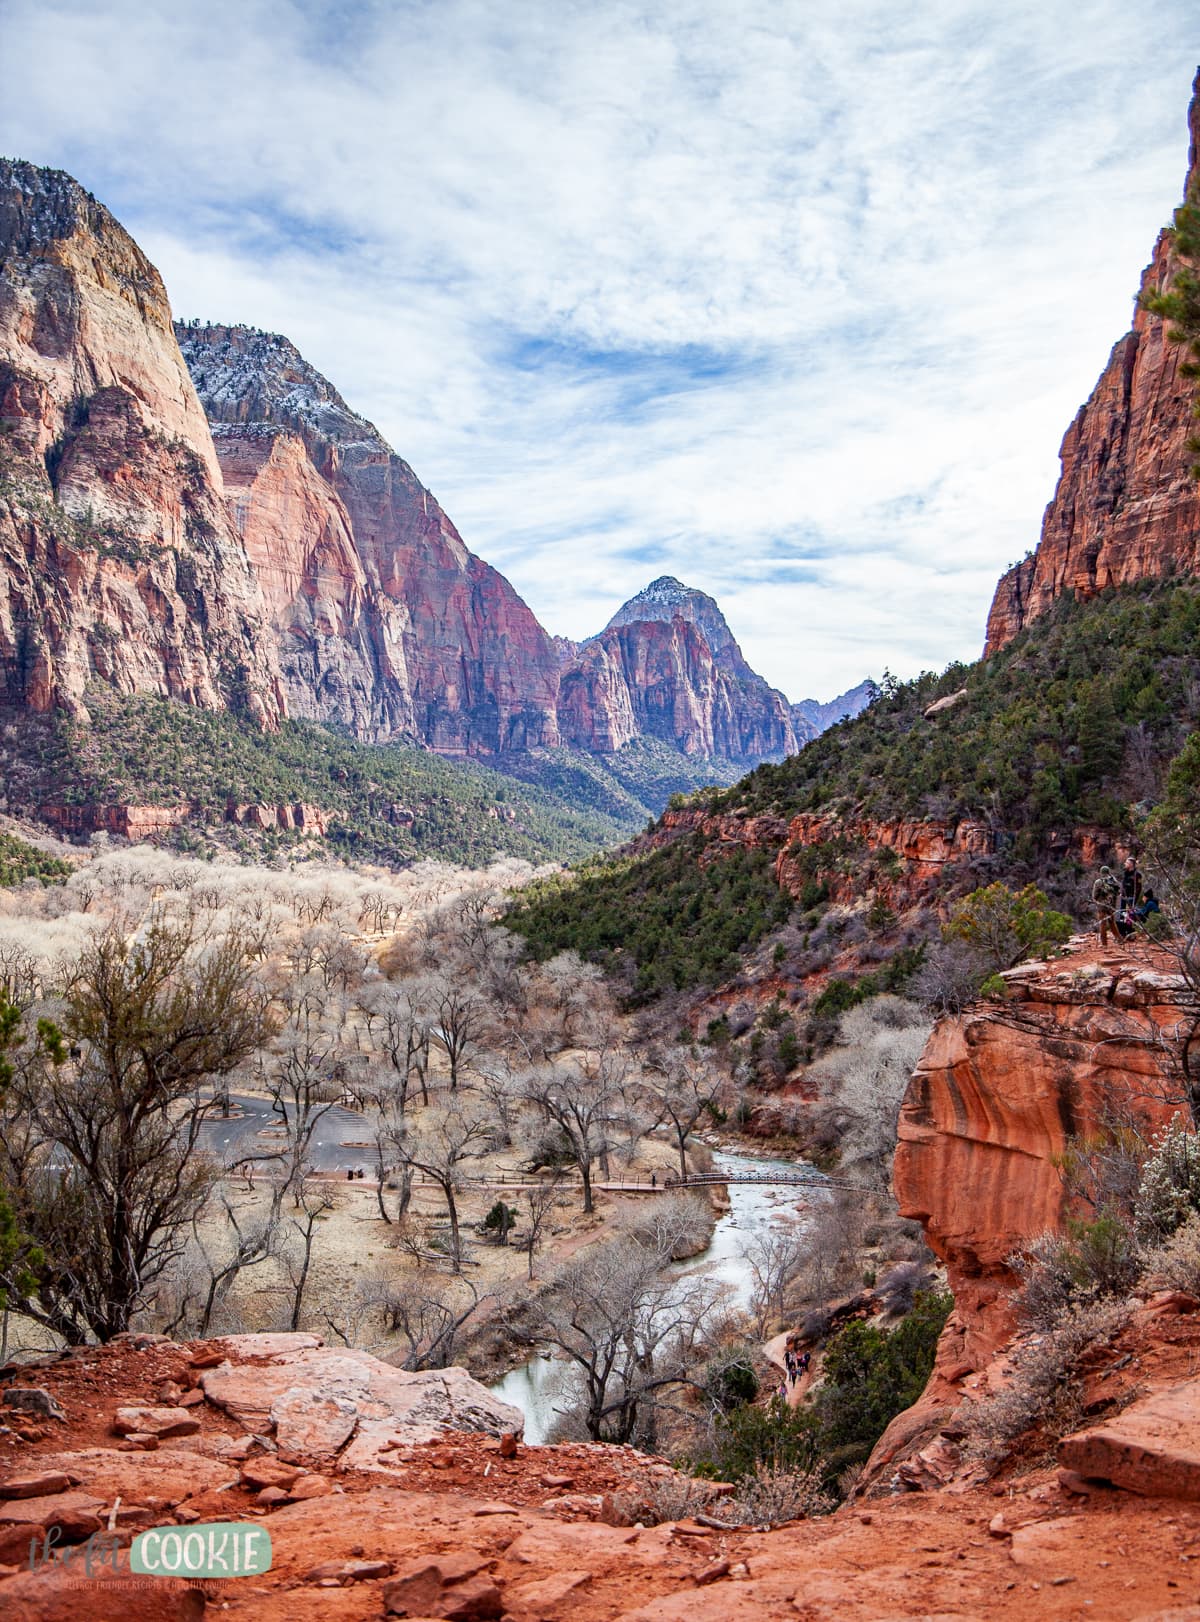 view of the Zion canyon from the Middle Emerald Pools Trail